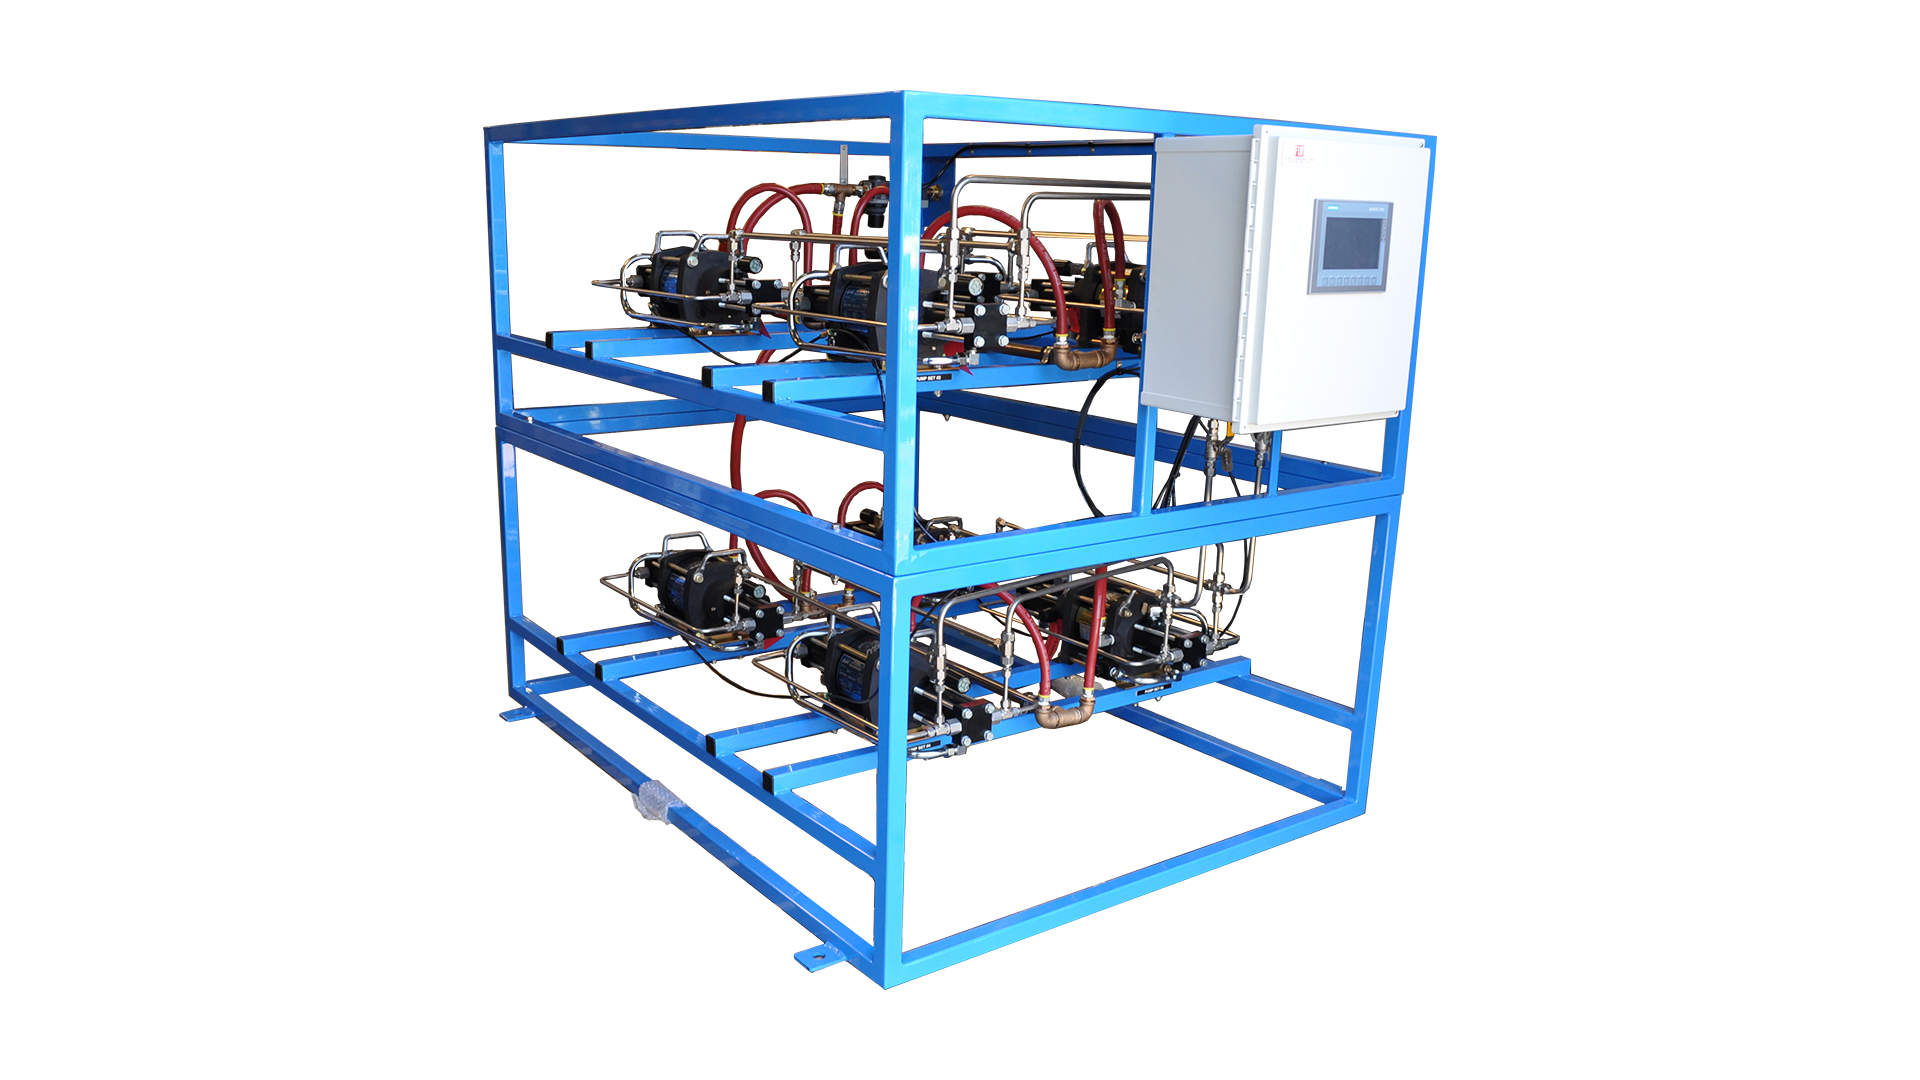 Haskel Pump Systems